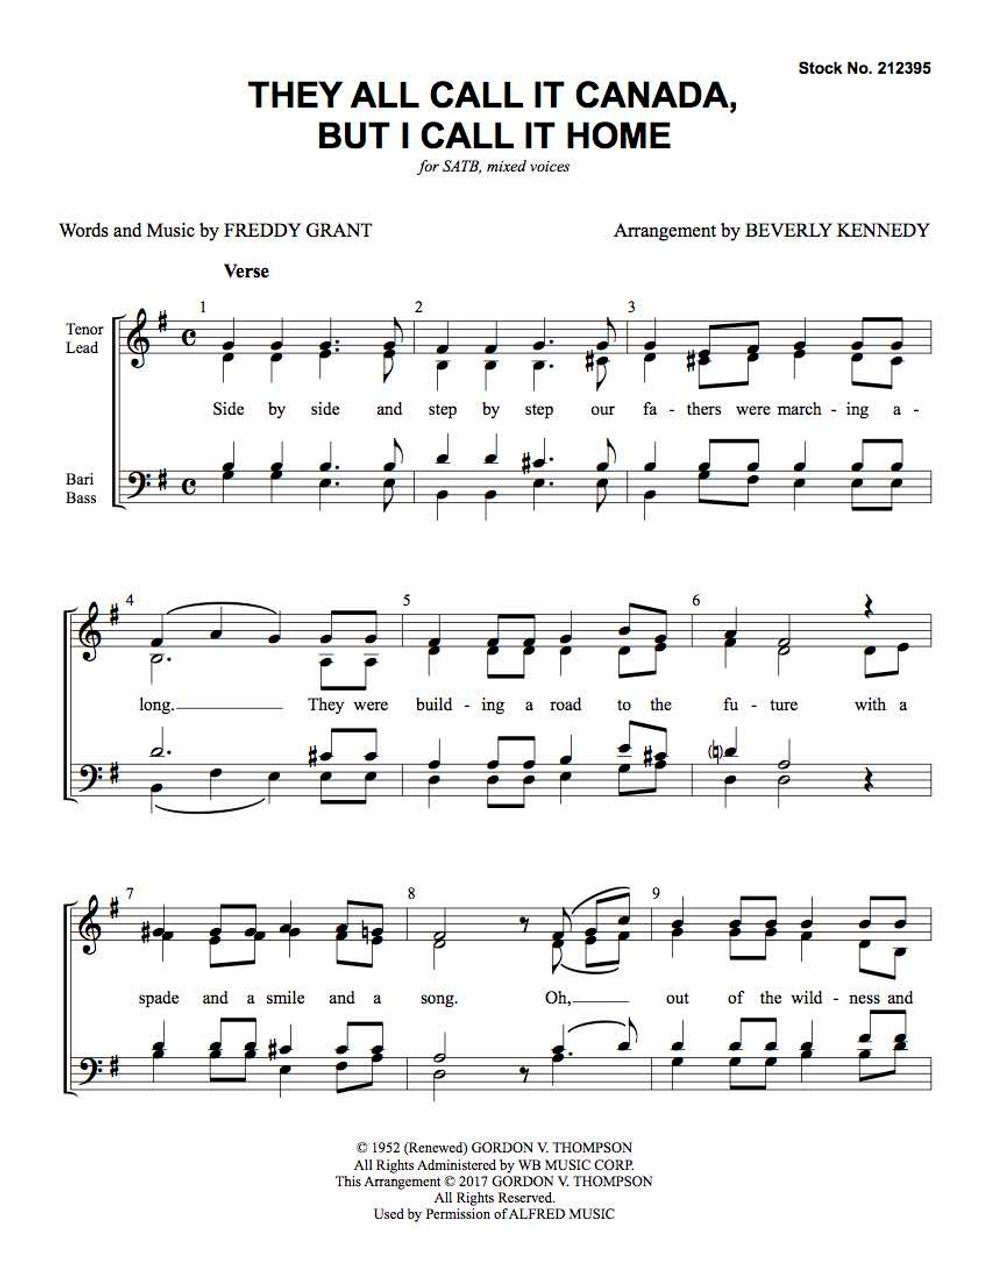 They Call It Canada, but I Call It Home (SATB) (arr. Kennedy) - Download